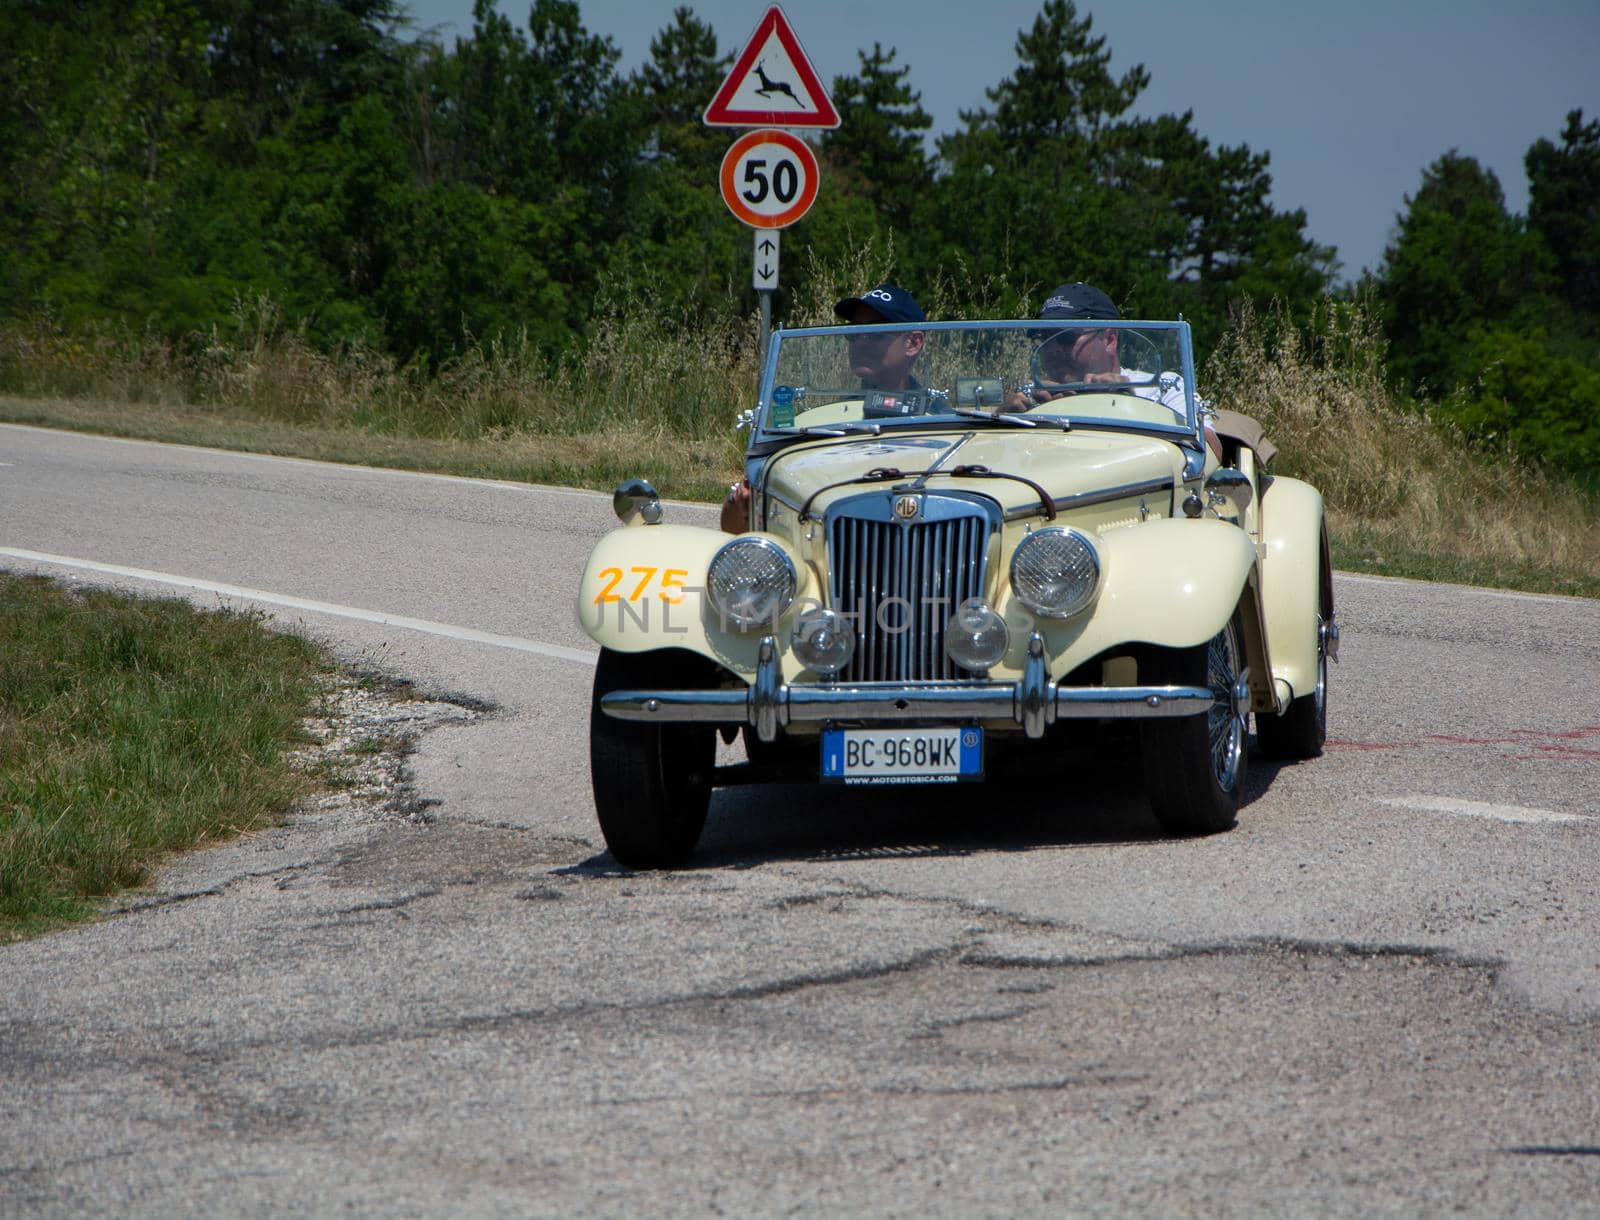 MG TF 1250 1953 on an old racing car in rally Mille Miglia 2022 the famous italian historical race (1927-1957 by massimocampanari